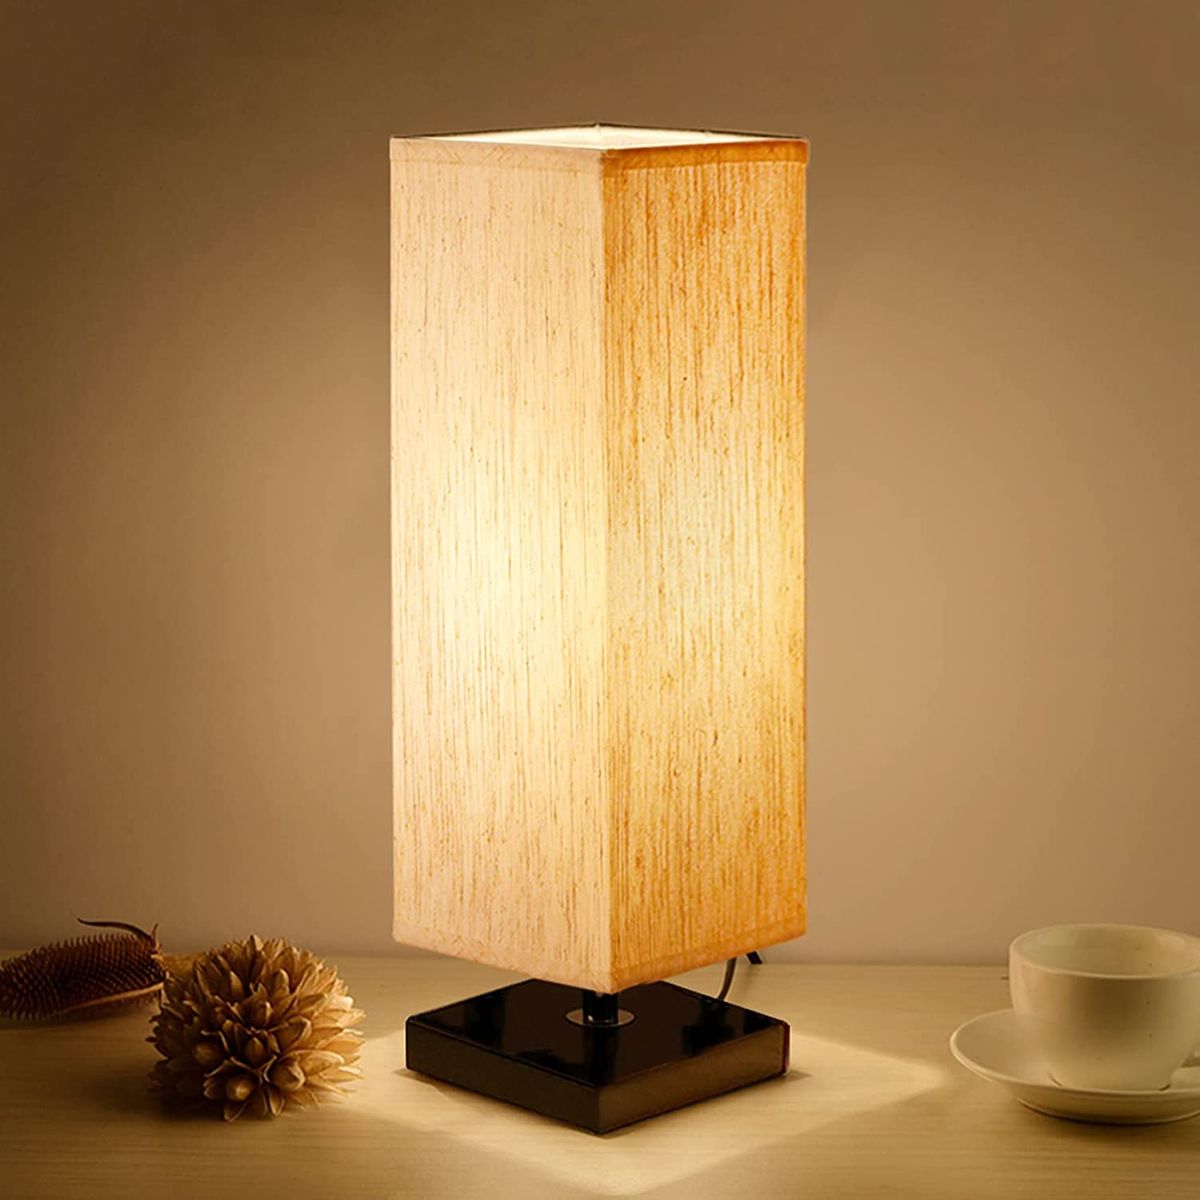 22 Best Bedside Lamps 2021 The Strategist, Bedroom Table Lamp With Dimmer